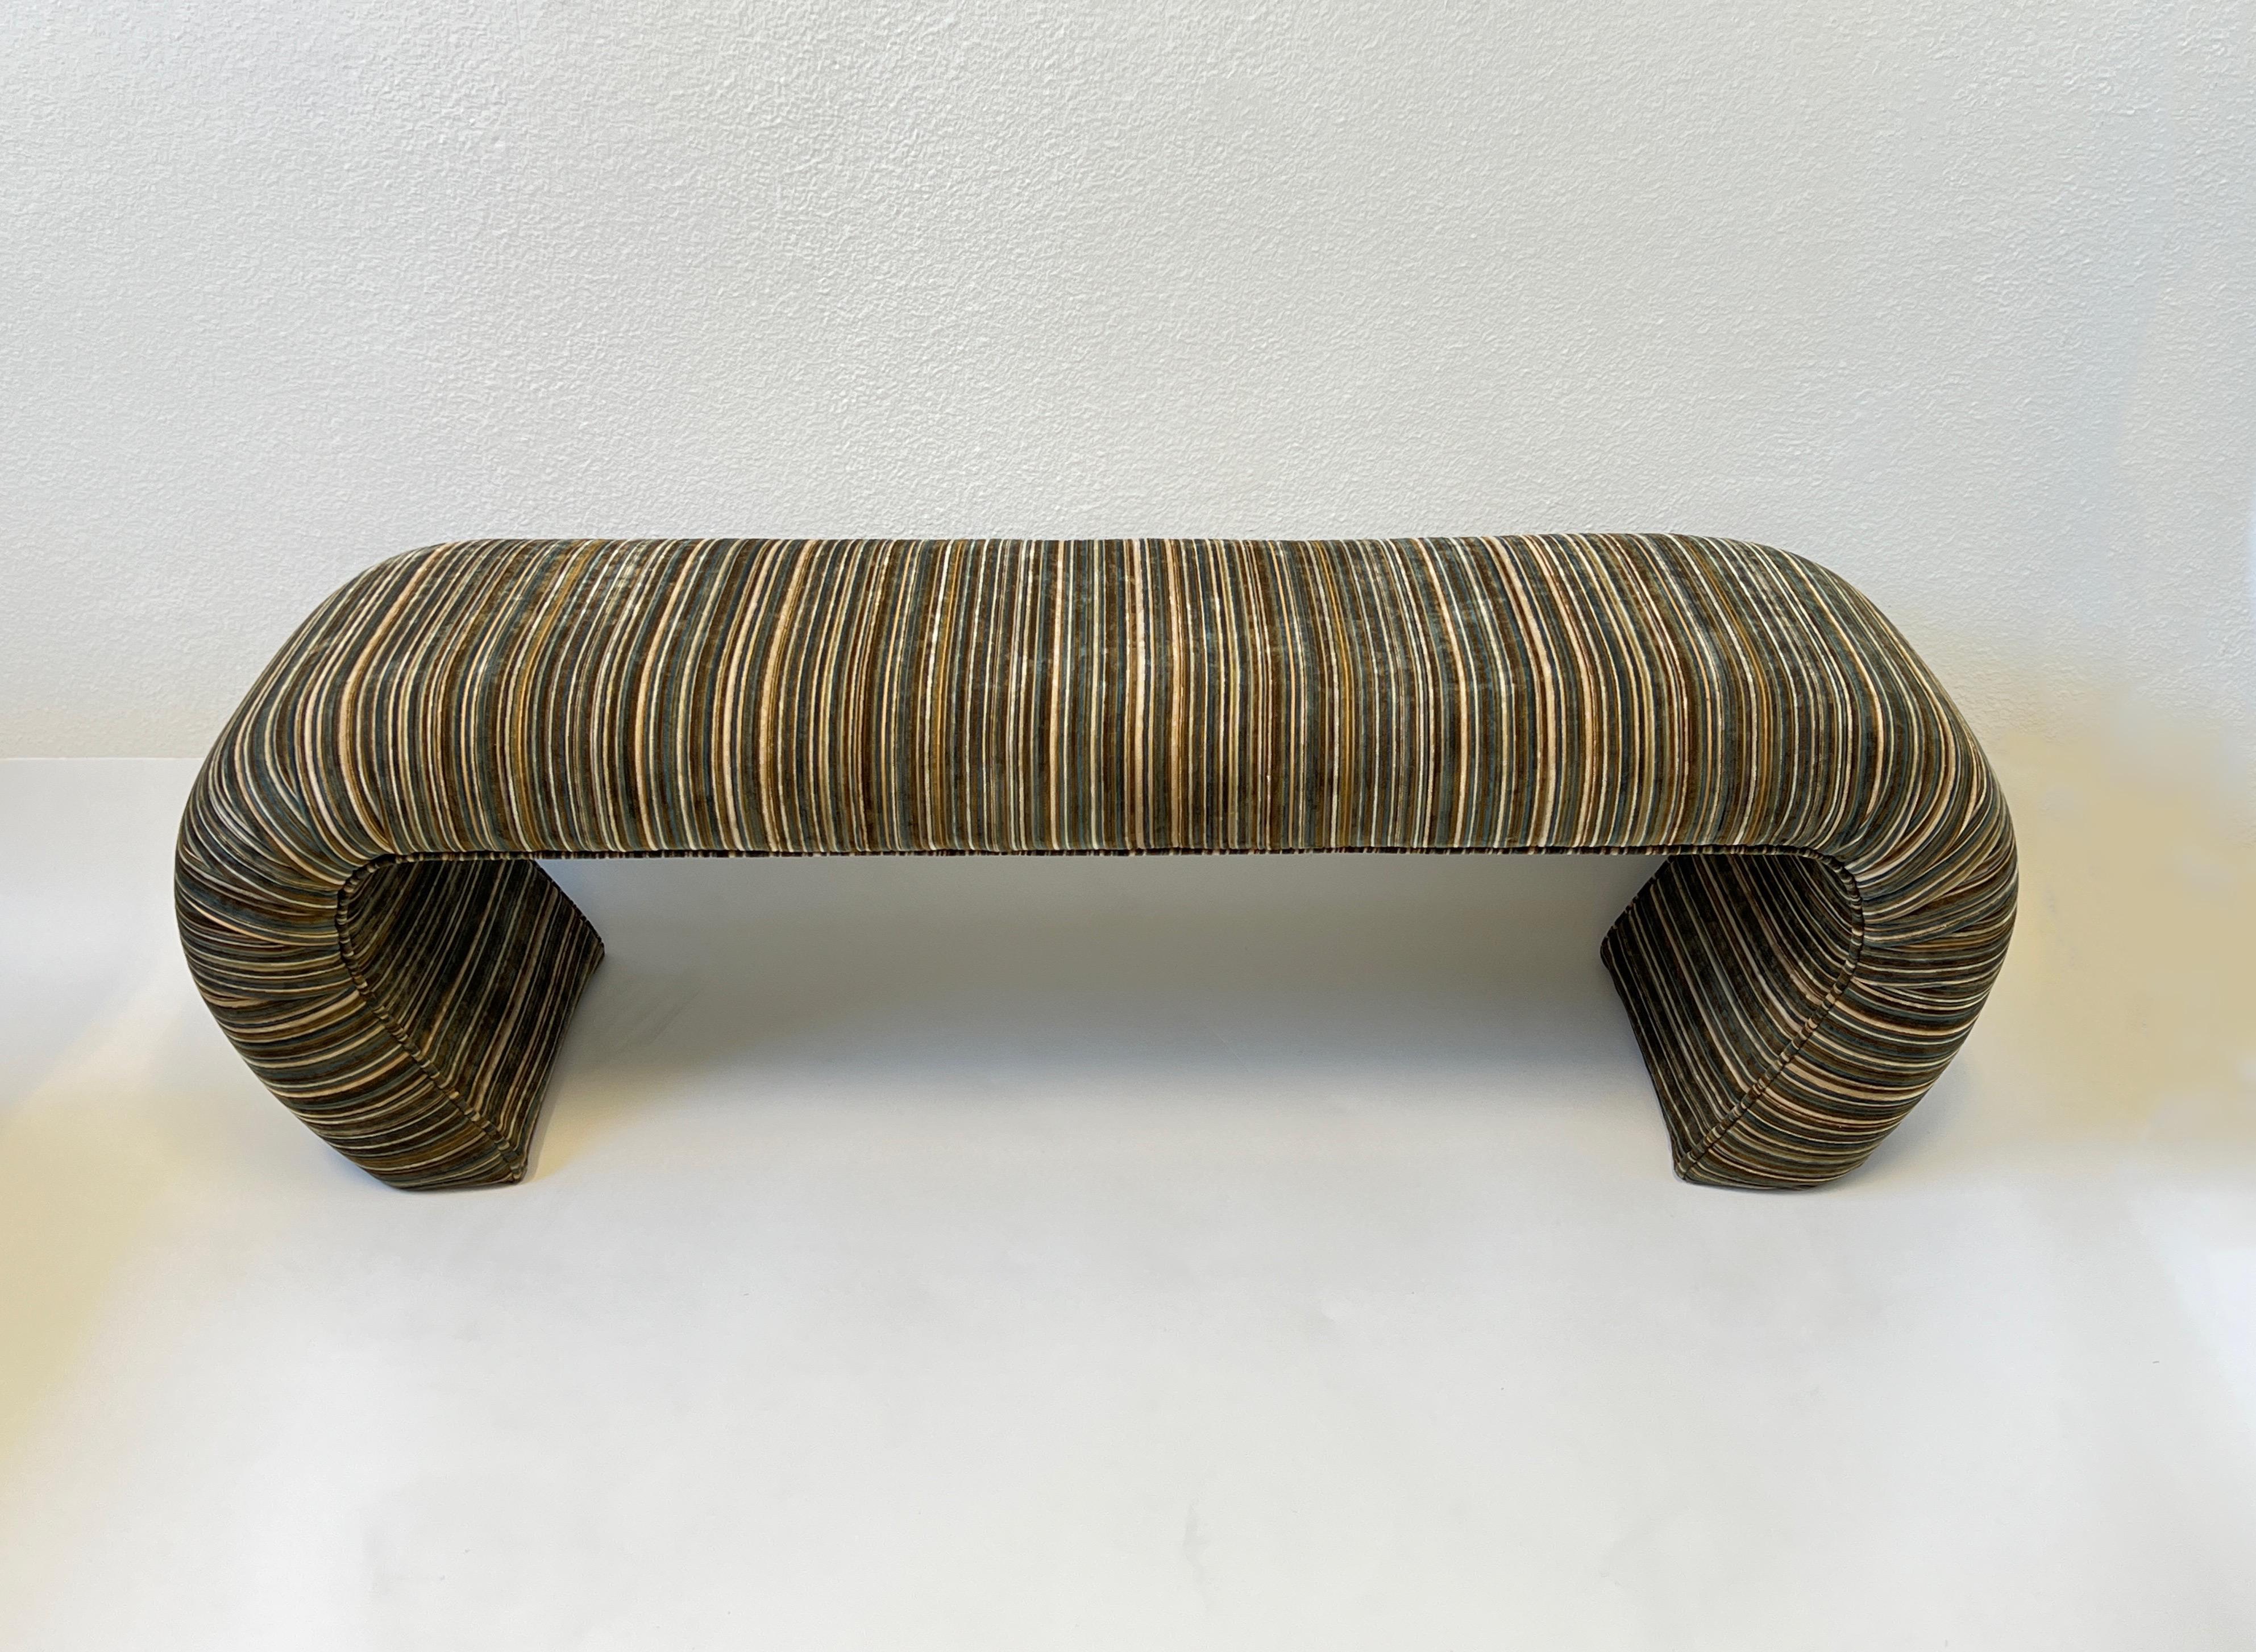 1980’s Burnout striped velvet waterfall bench by Steve Chase. In original condition. Professionally stemmed clean. 

Measurements: 60” wide, 18” deep, 18.5” high.